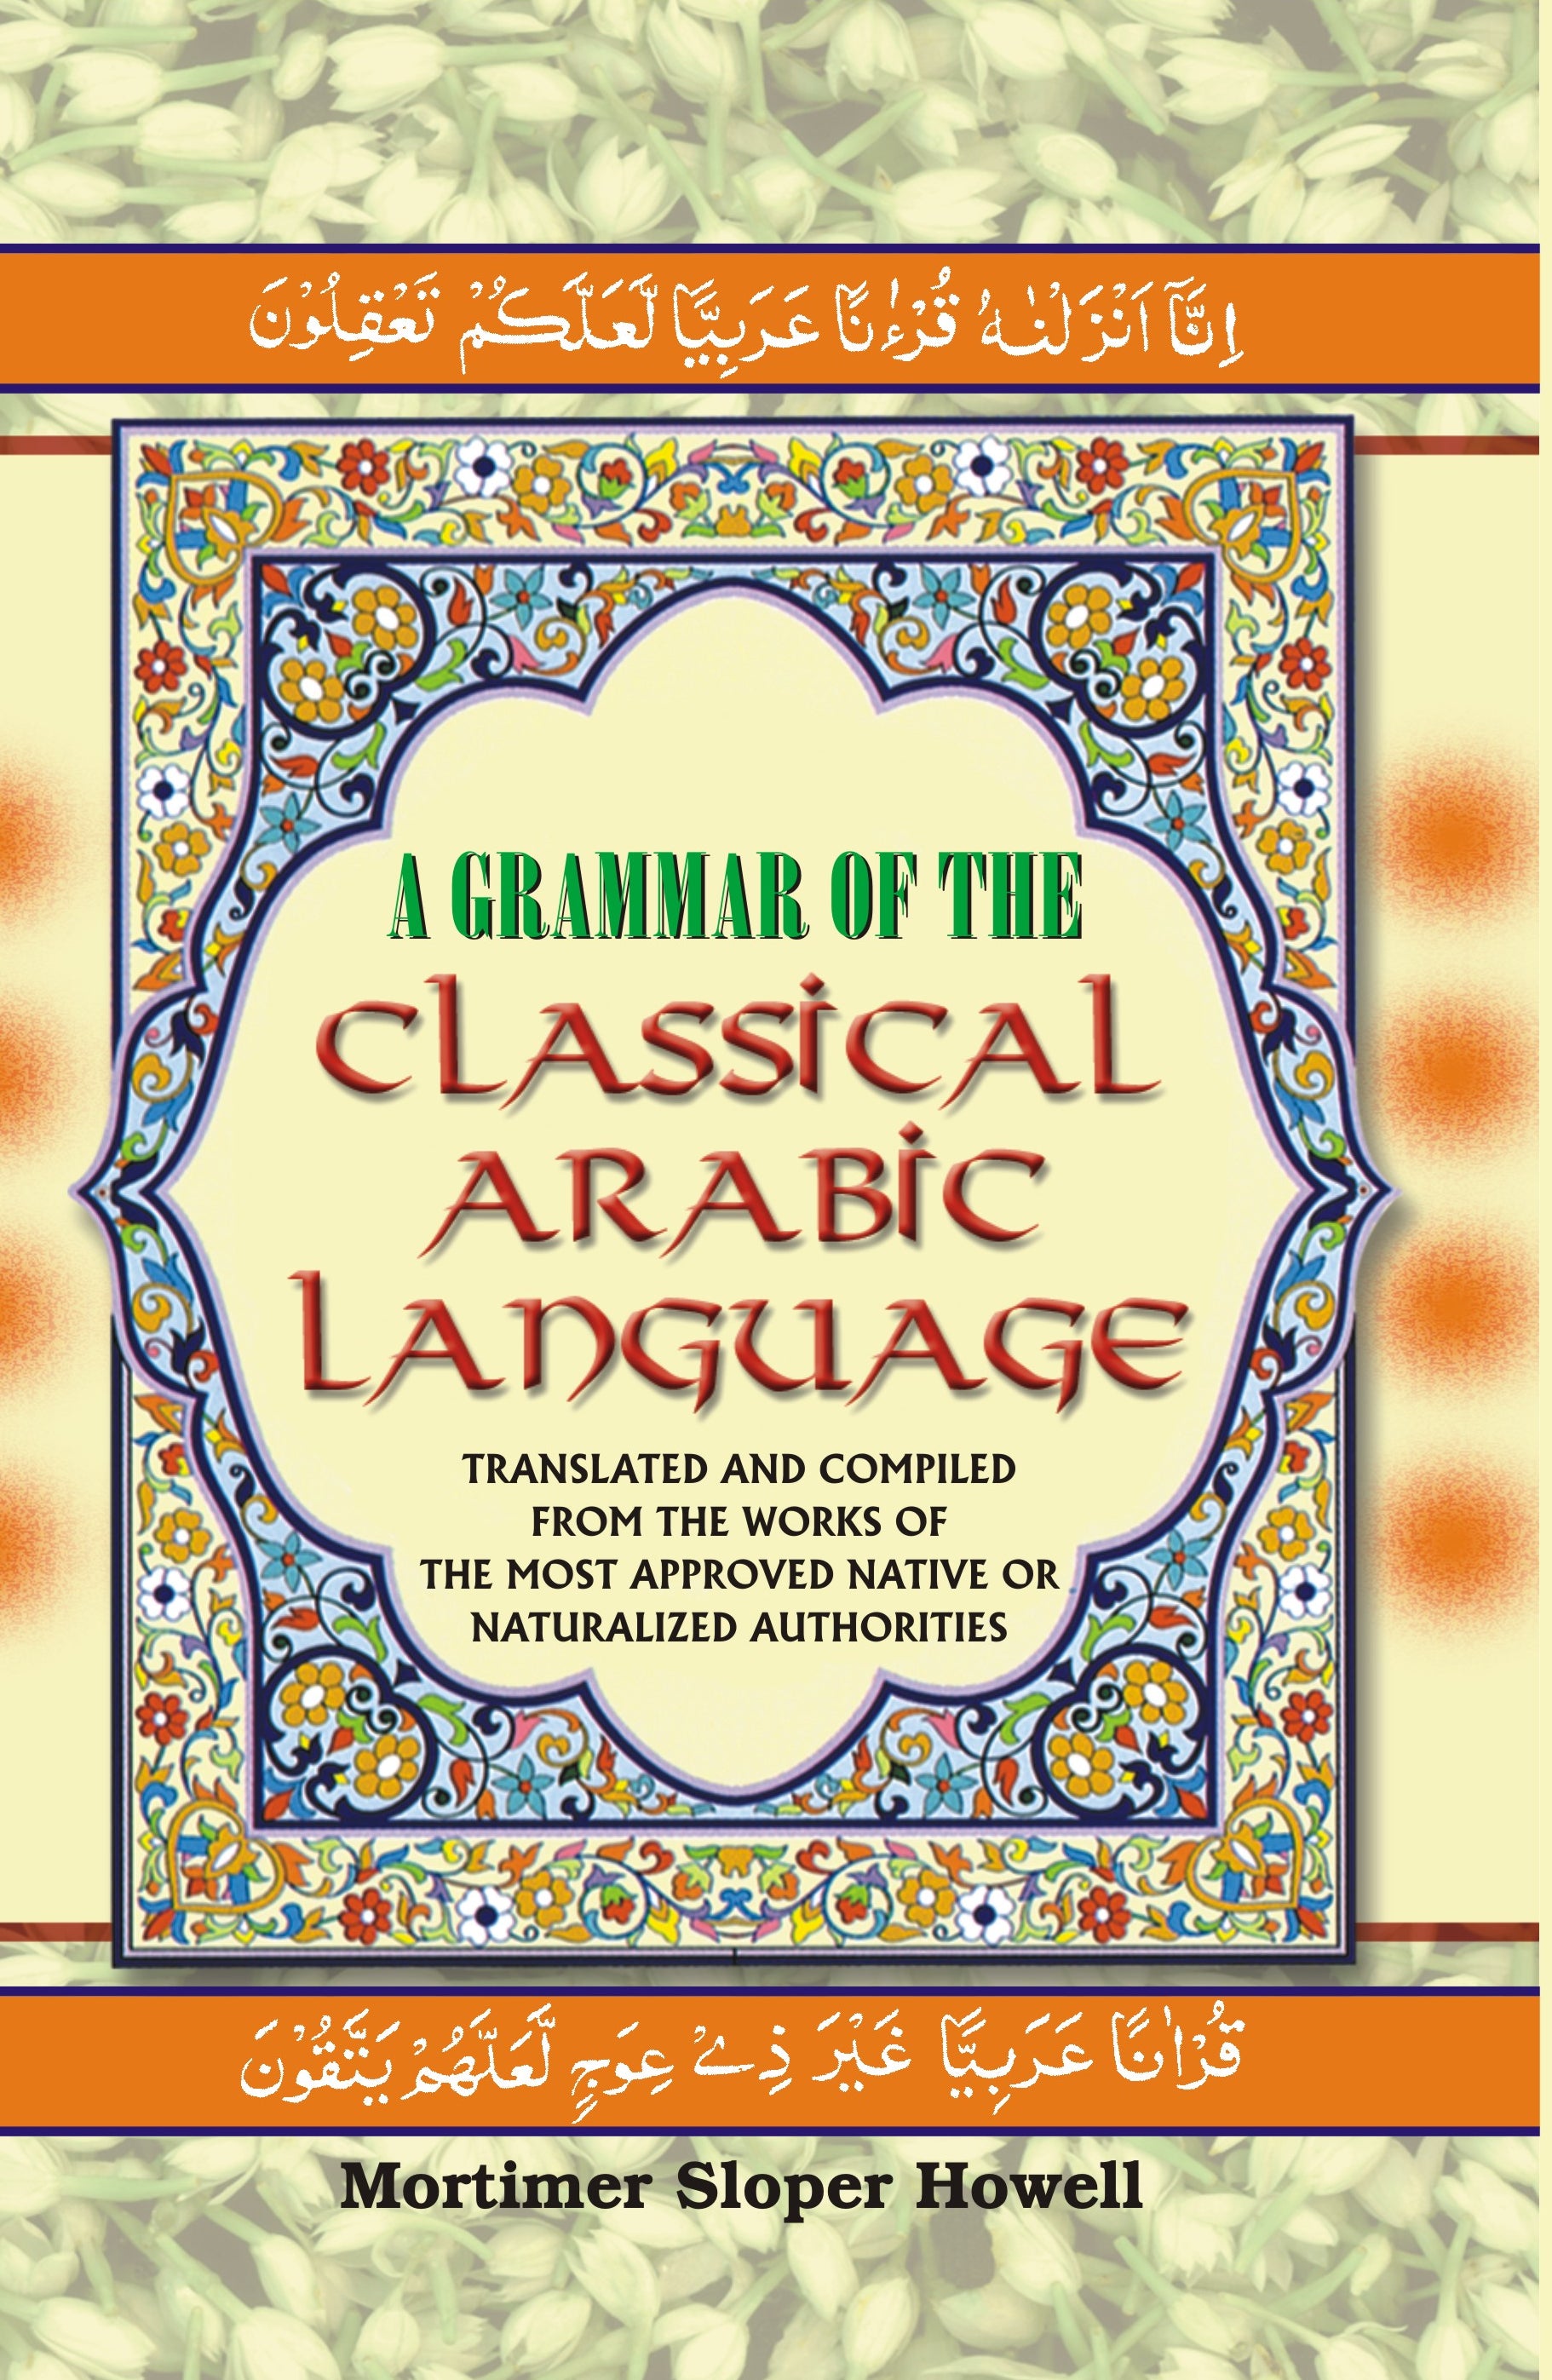 A Grammar of the Classical Arabic Language : Translated and Compiled From the Works of the Most Approved Native Or Naturalized Authorities (The Common Process - Part 1) Volume Vol. 6th [Hardcover]